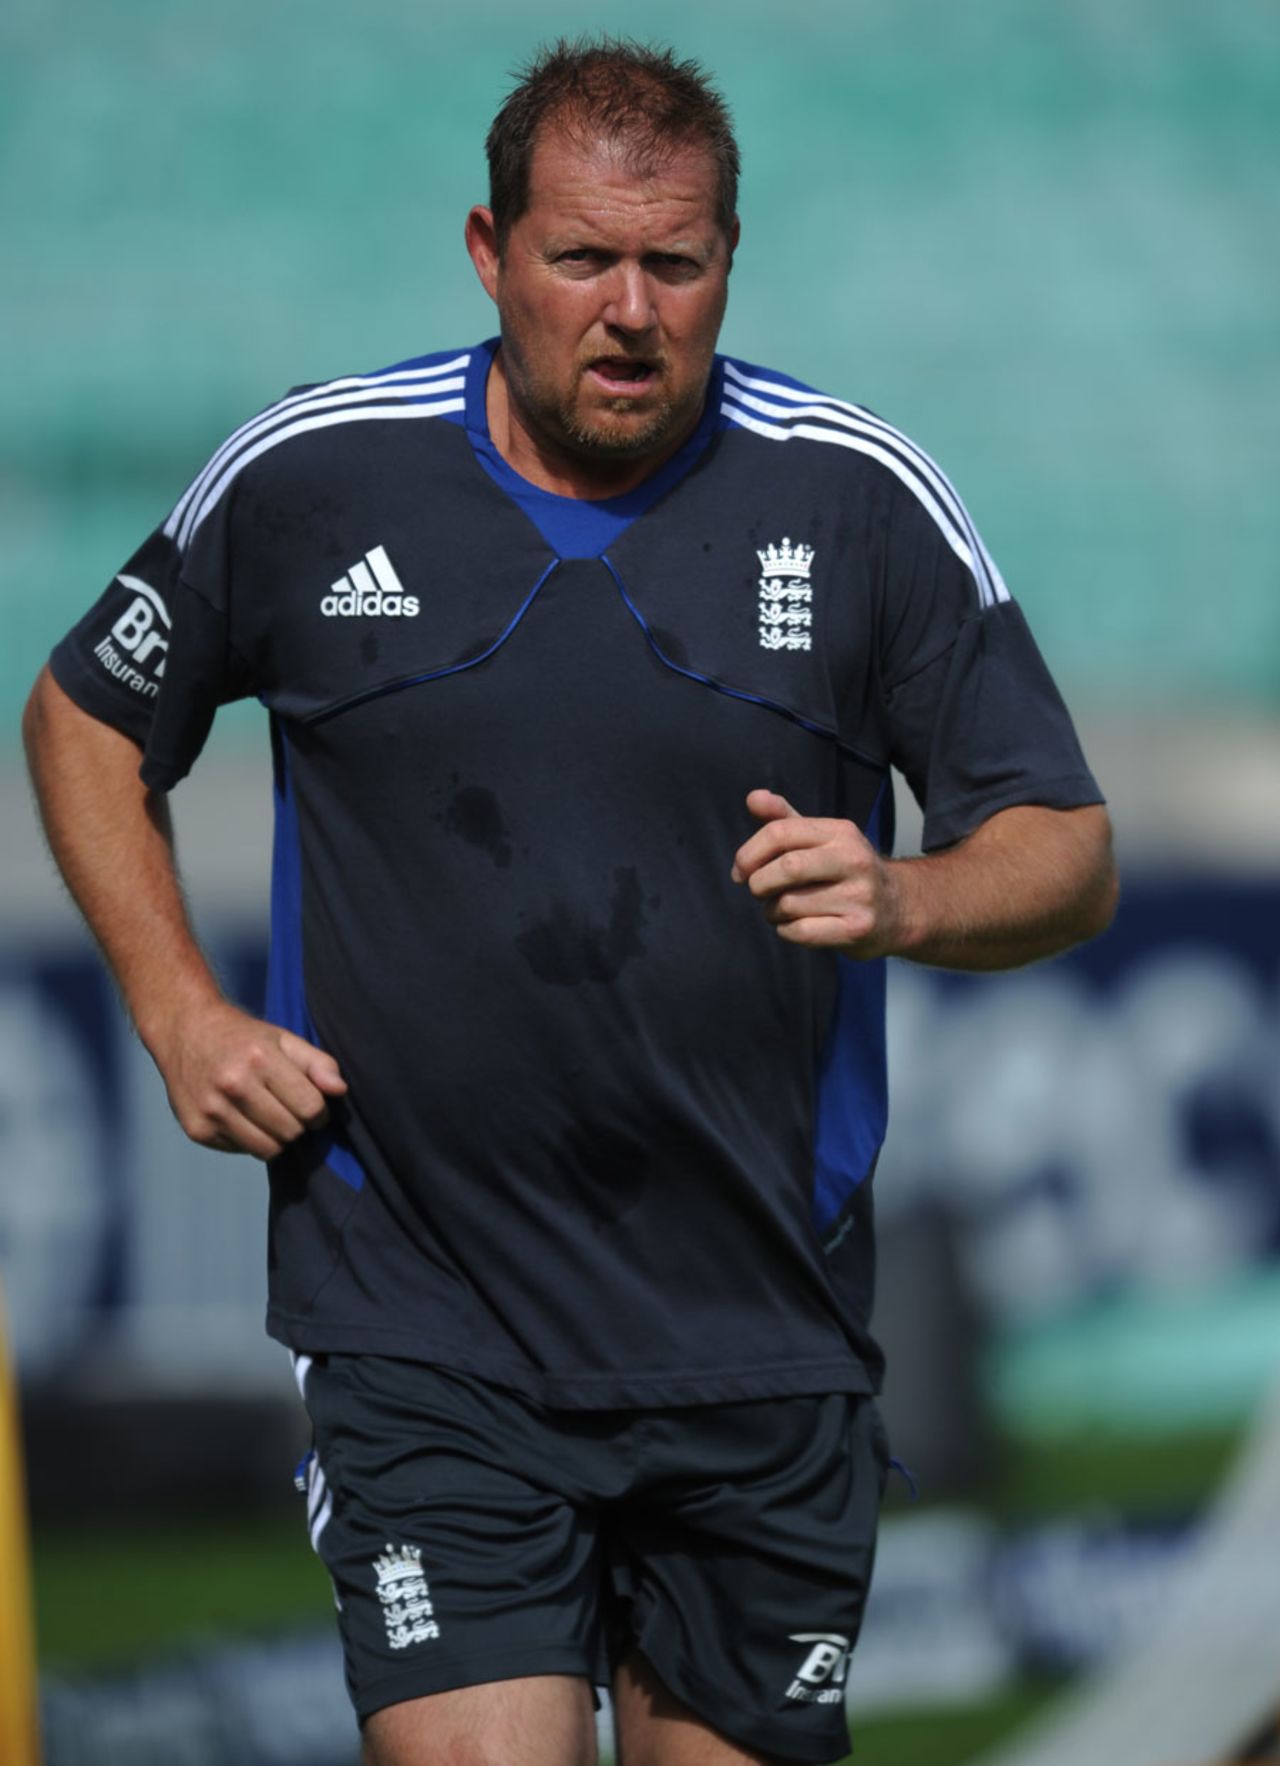 England bowling coach David Saker goes for a run before play, England v South Africa, 1st Test, The Oval, 4th Day, July, 22, 2012